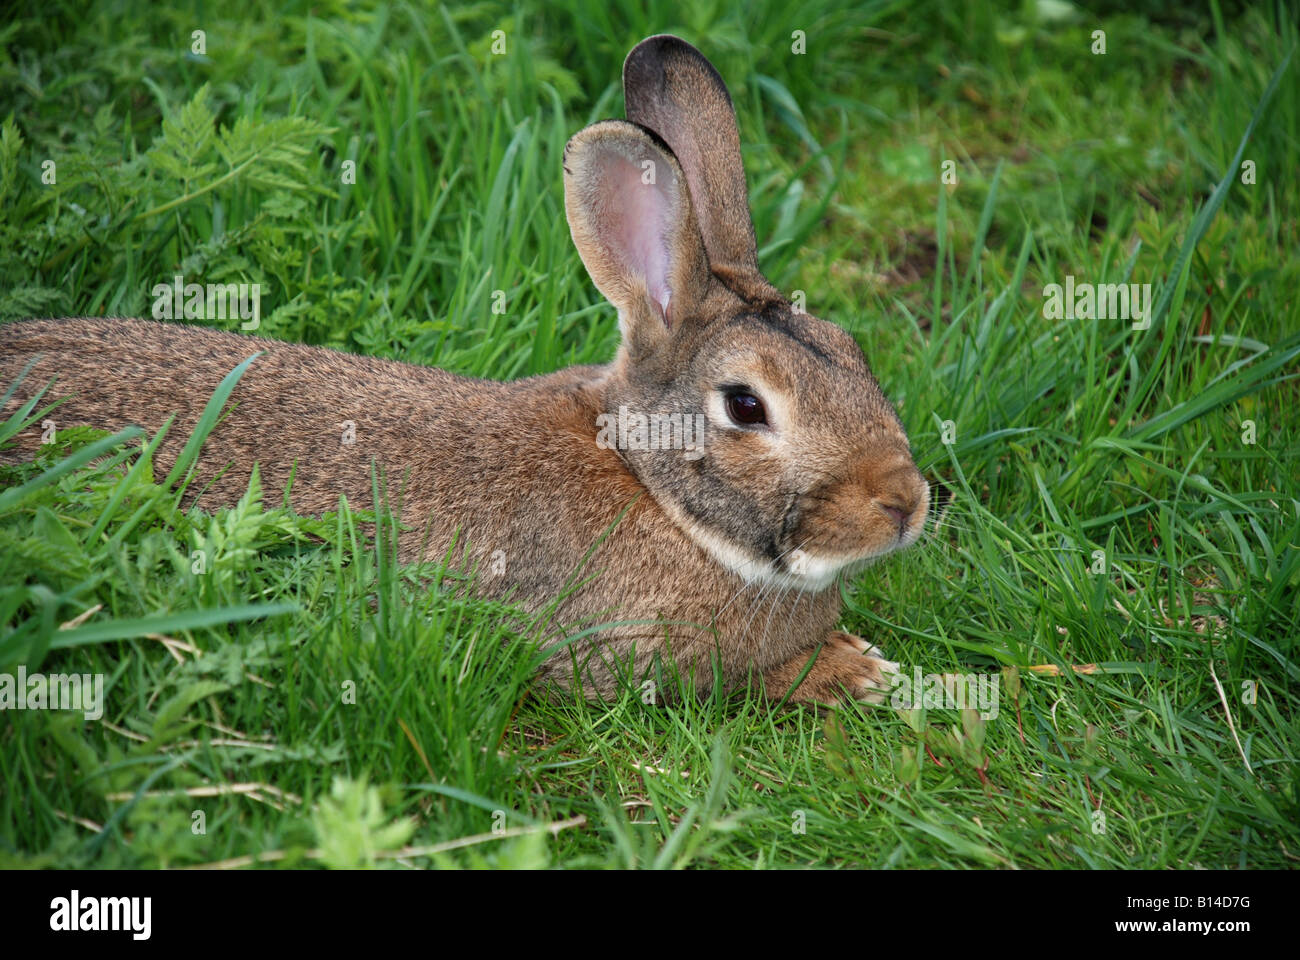 A rabbit resting in the grass Stock Photo